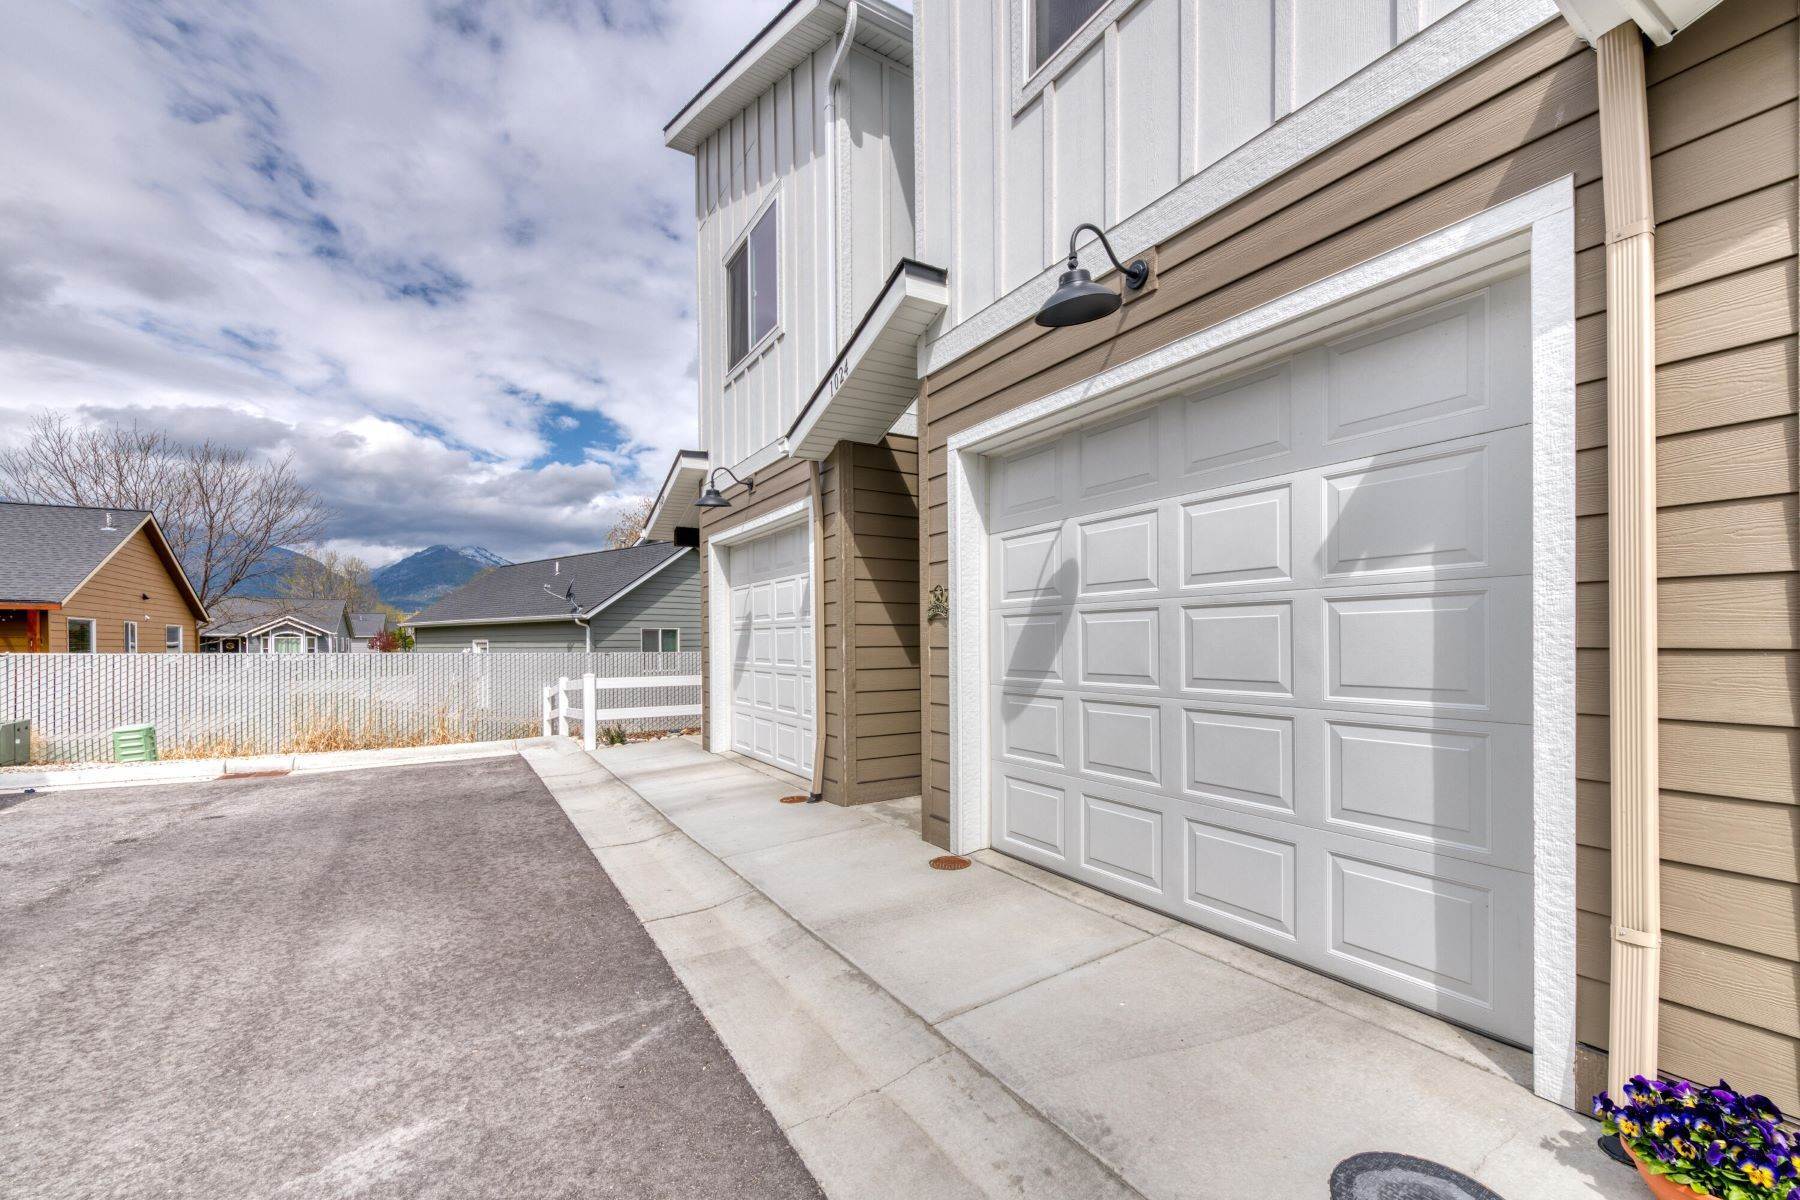 3. Townhouse for Sale at Stockyard Court Townhome Stockyard Court Townhome, Hamilton, Montana 59840 United States